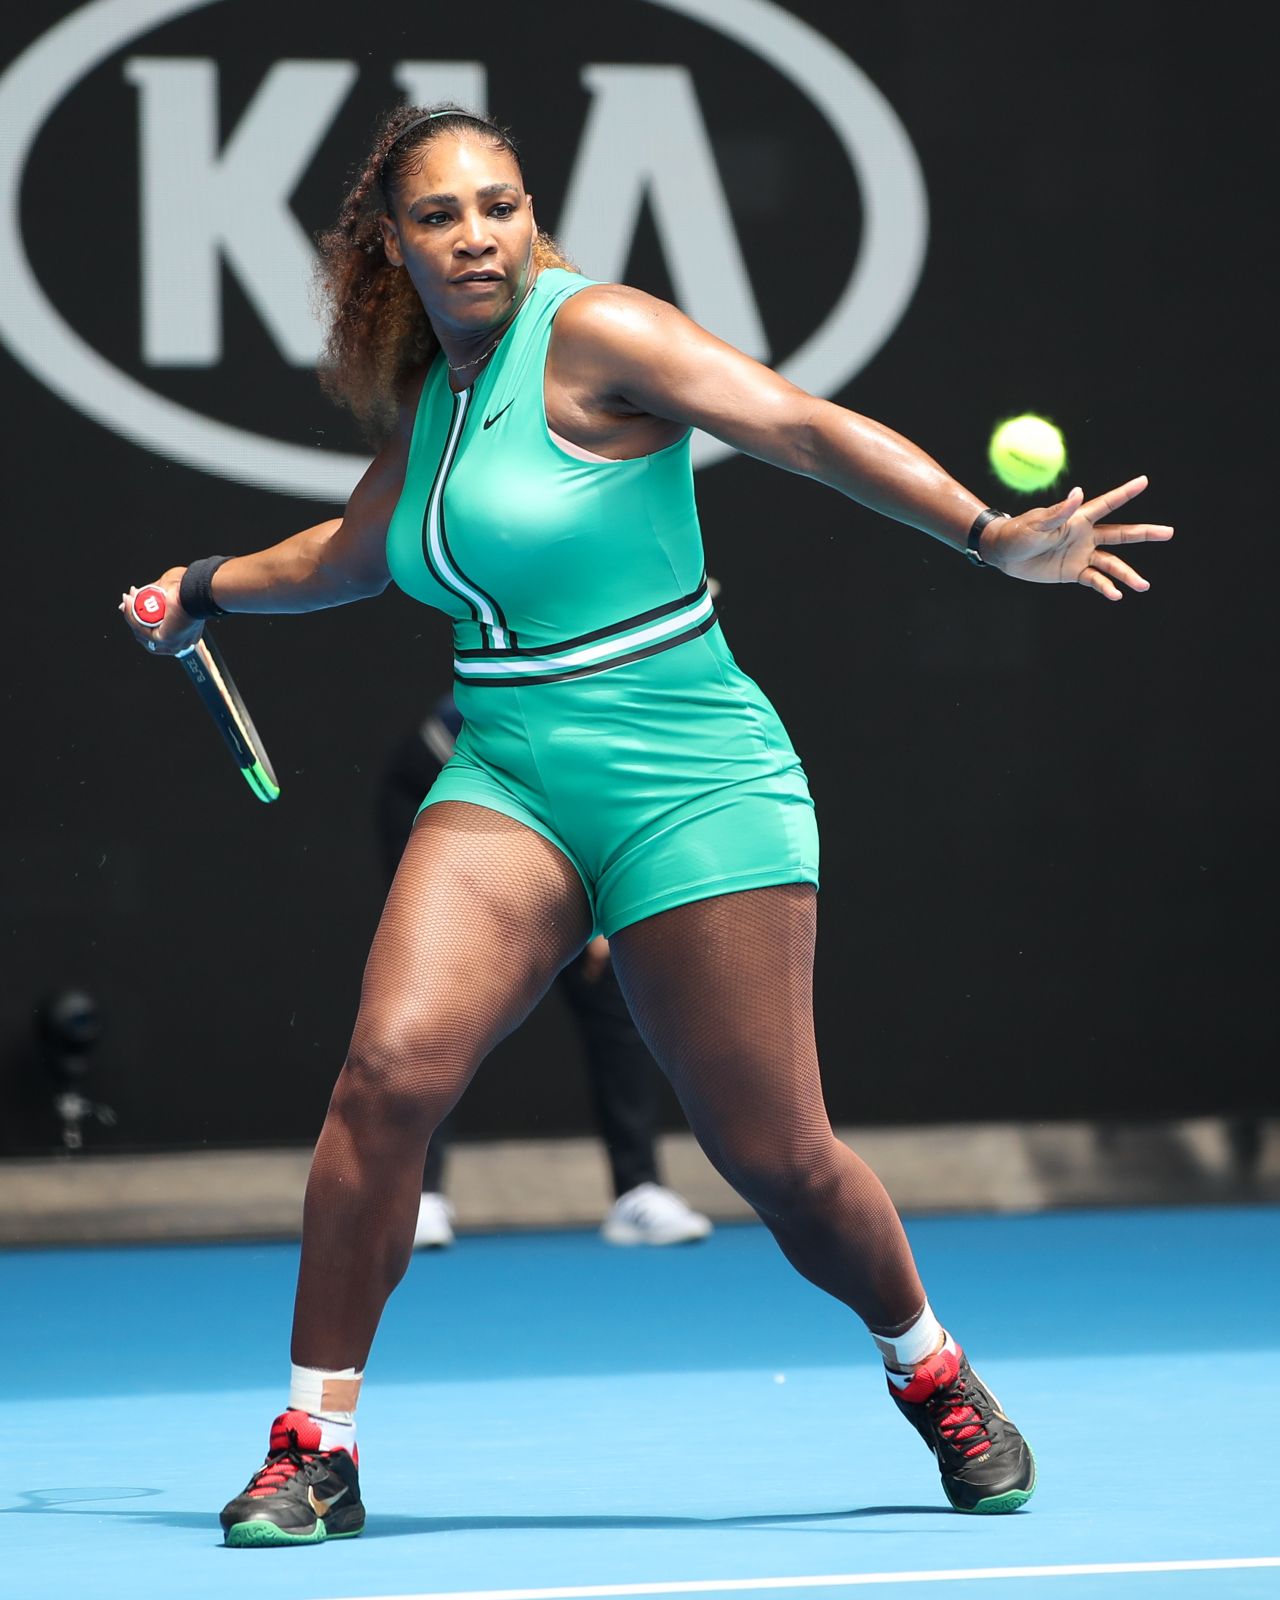 Serena Williams Australian Open 2021 Results / COMFIRMED! Federer will challenge Djokovic, Nadal, Thiem ... - They play friday in melbourne.